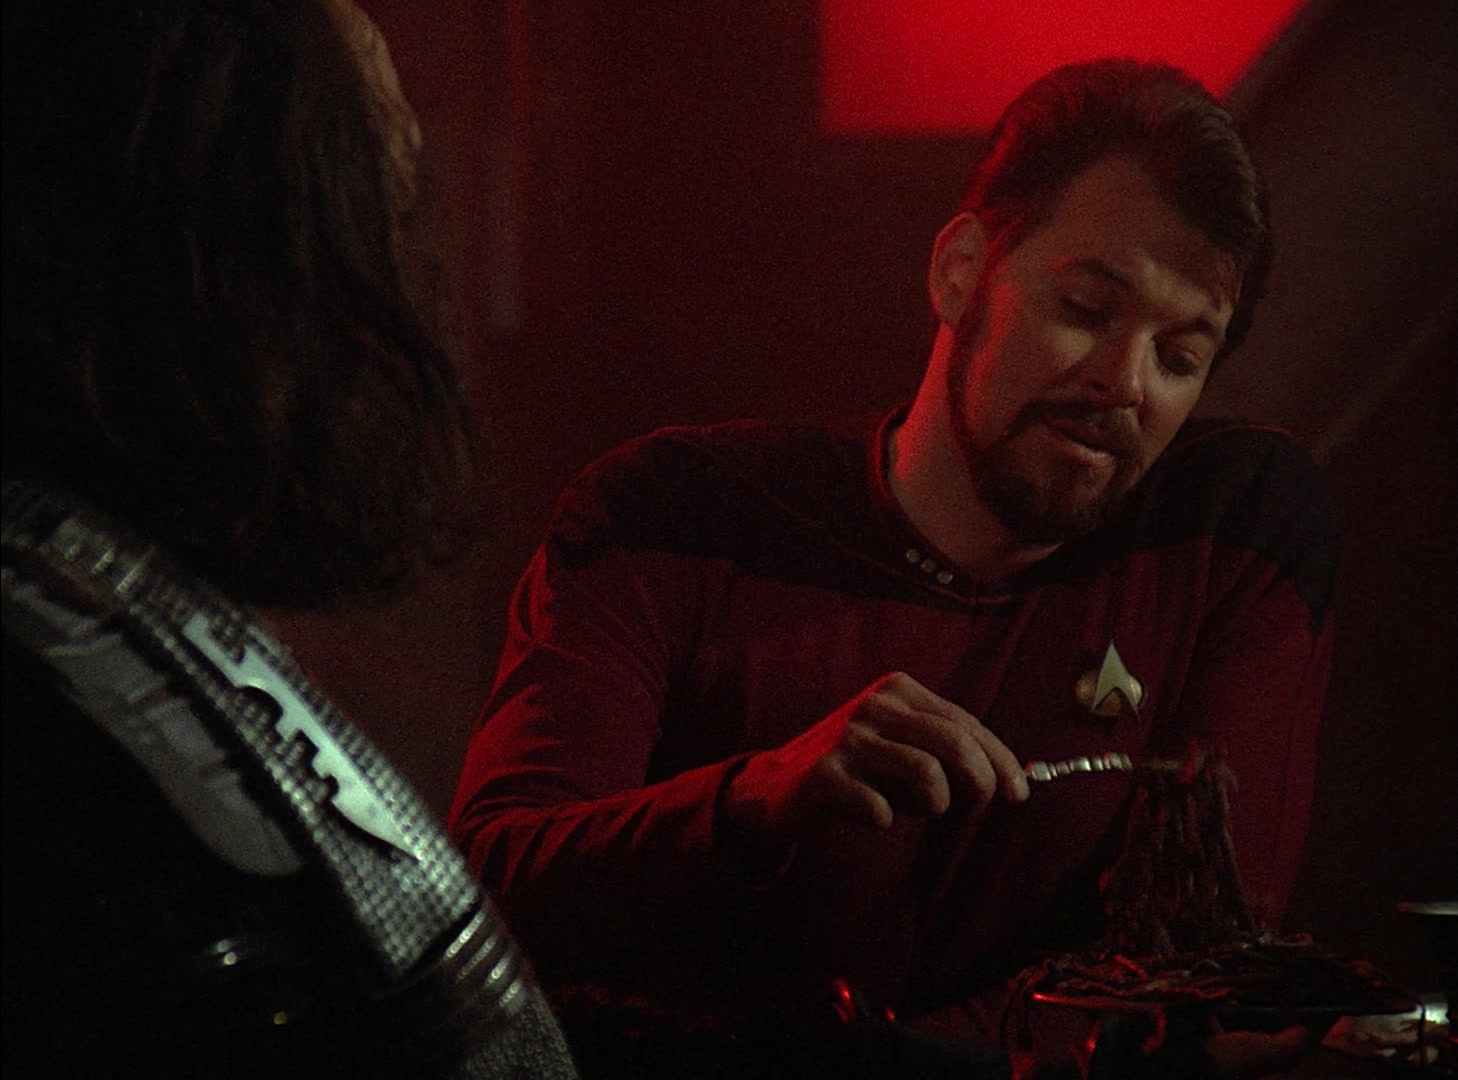 Commander Riker in his Starfleet uniform considers eating a bite of live serpent worms while talking to his Klingon crewmate during an officer exchange